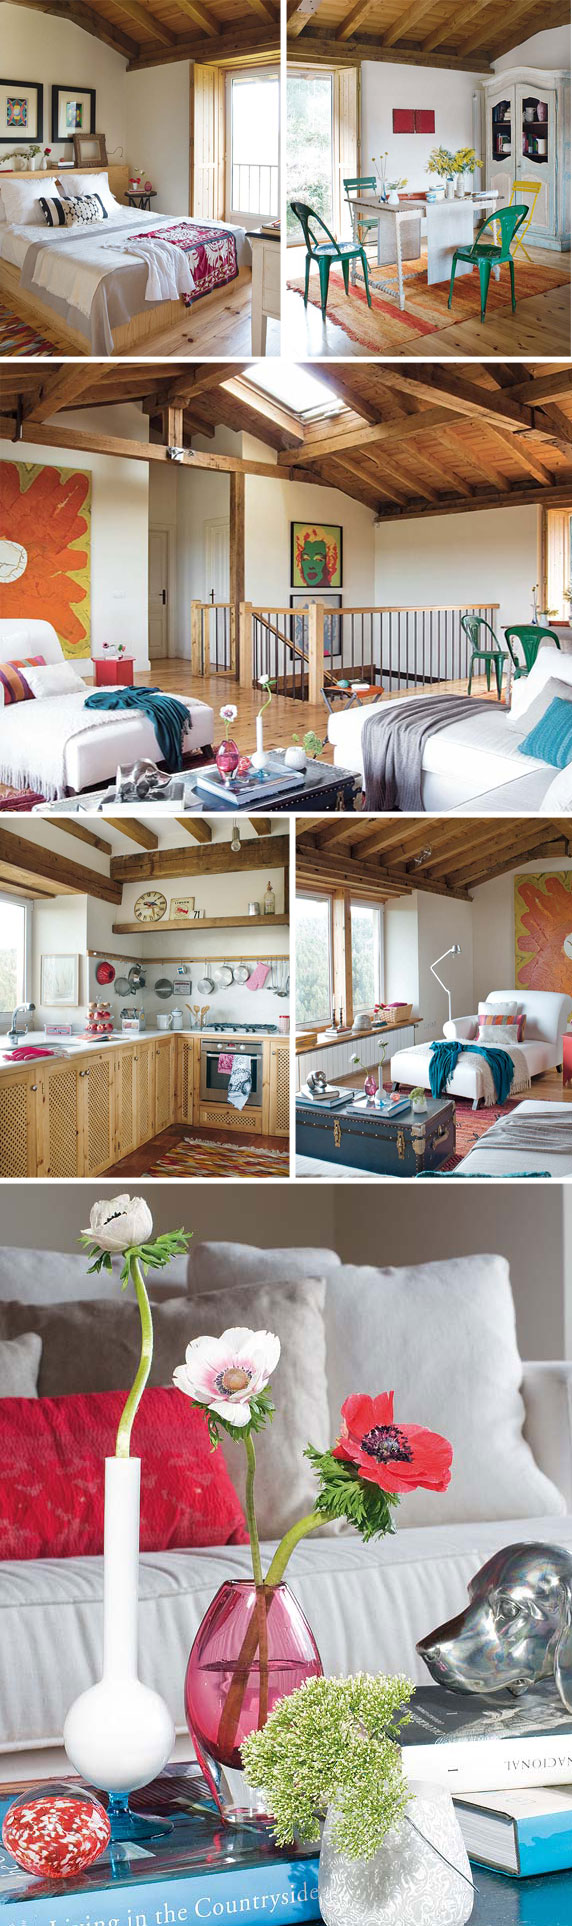 Summer Cottage Decorating Ideas: colors and wood | Modern Interiors